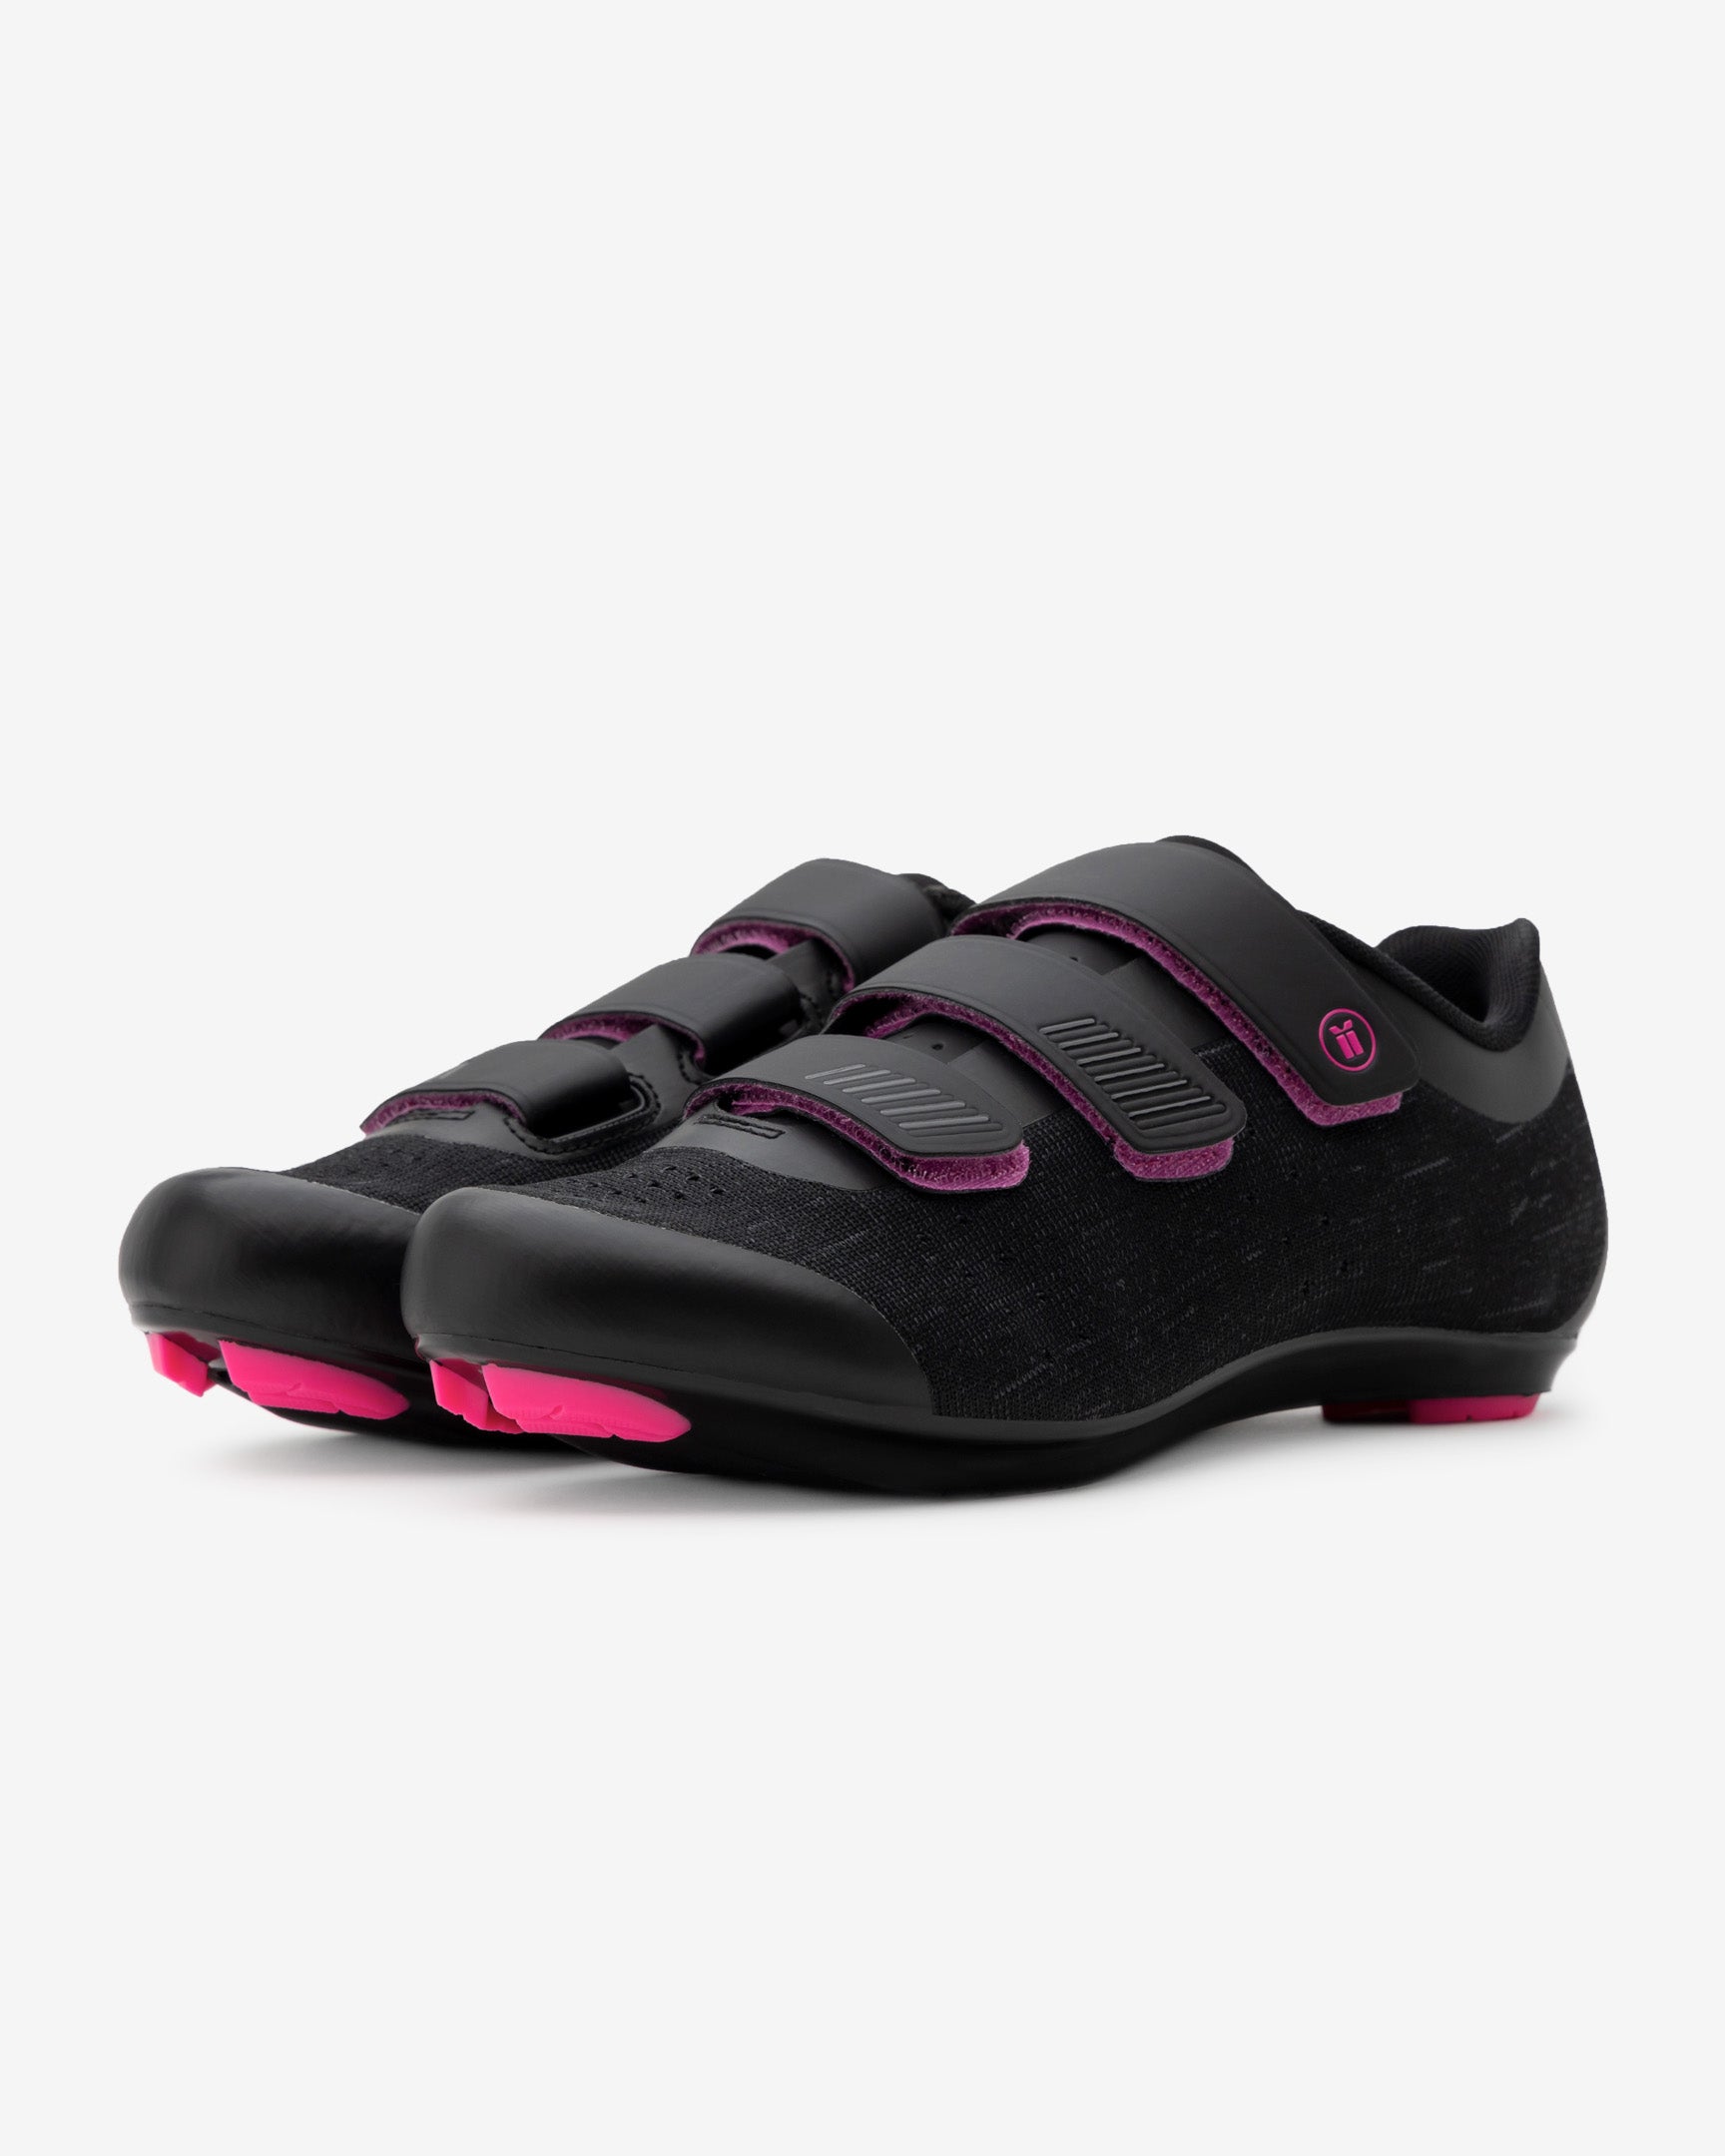 Tommaso Pista Women’s Indoor Cycling Shoes